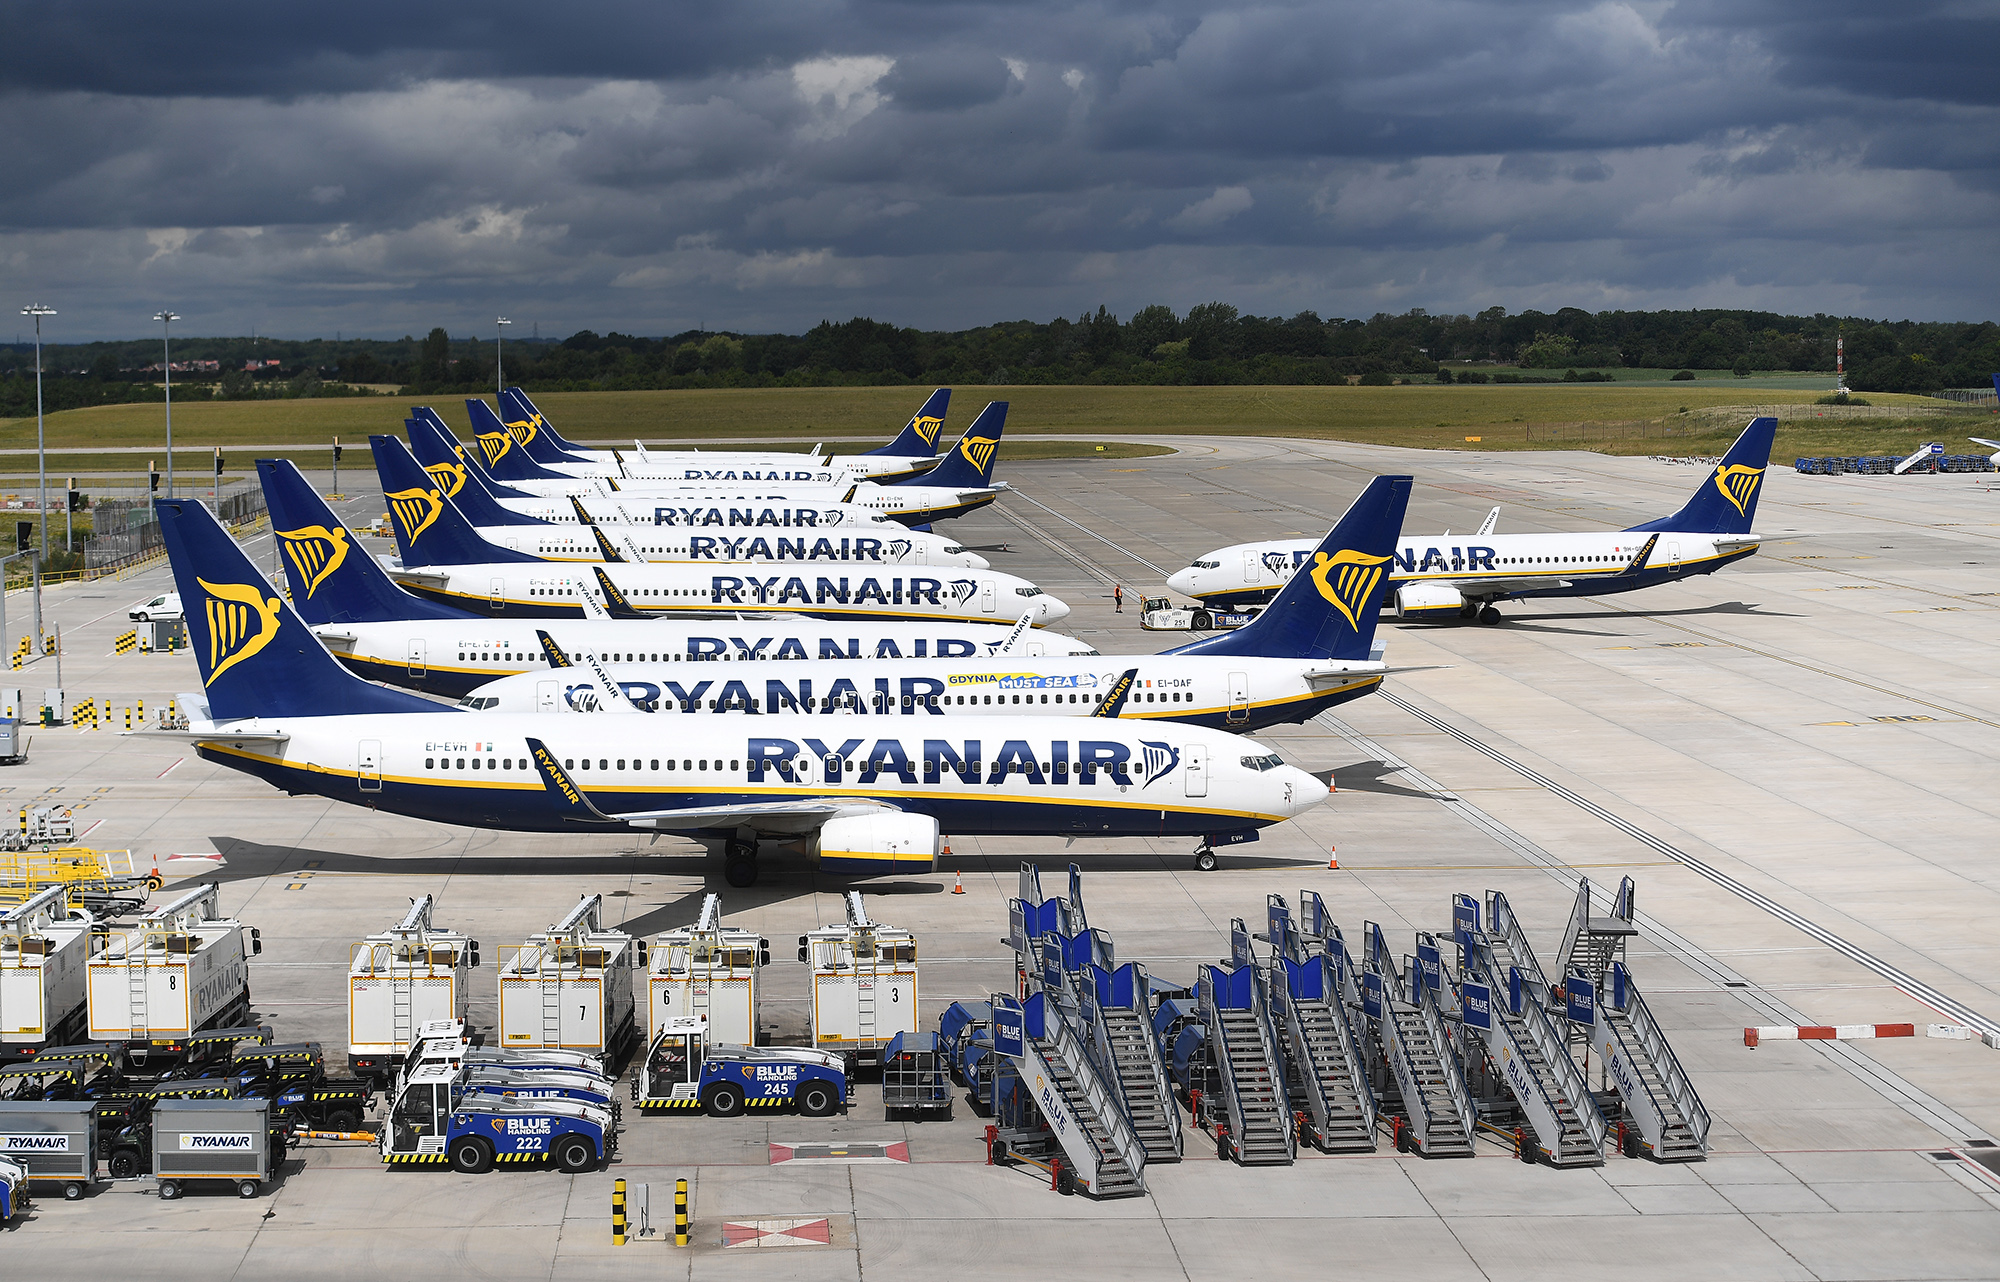 Ryanair is planning several new routes from Helsinki to Tampere